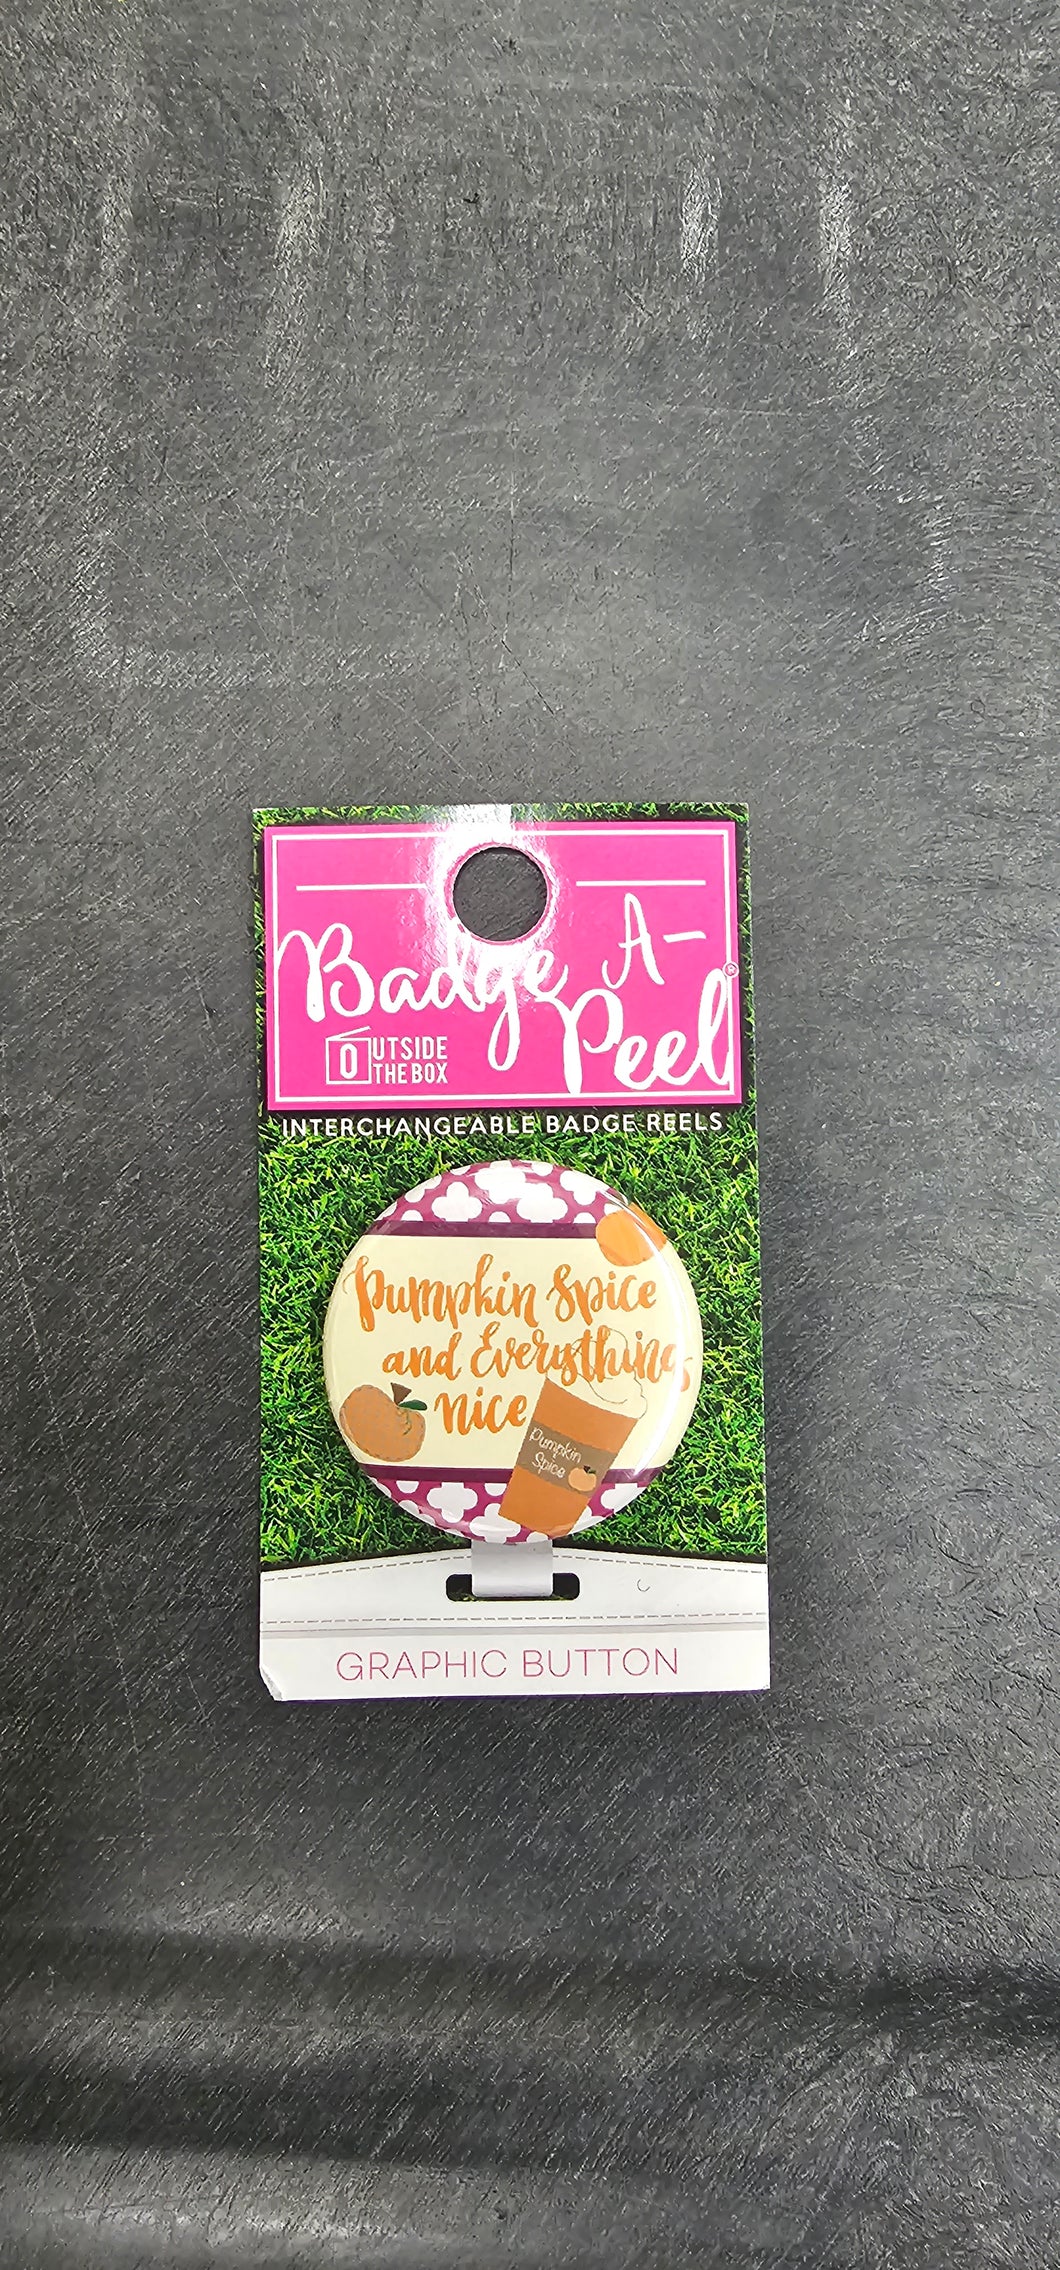 Badge-A-Peel Pumpkin Spice and Everything Nice